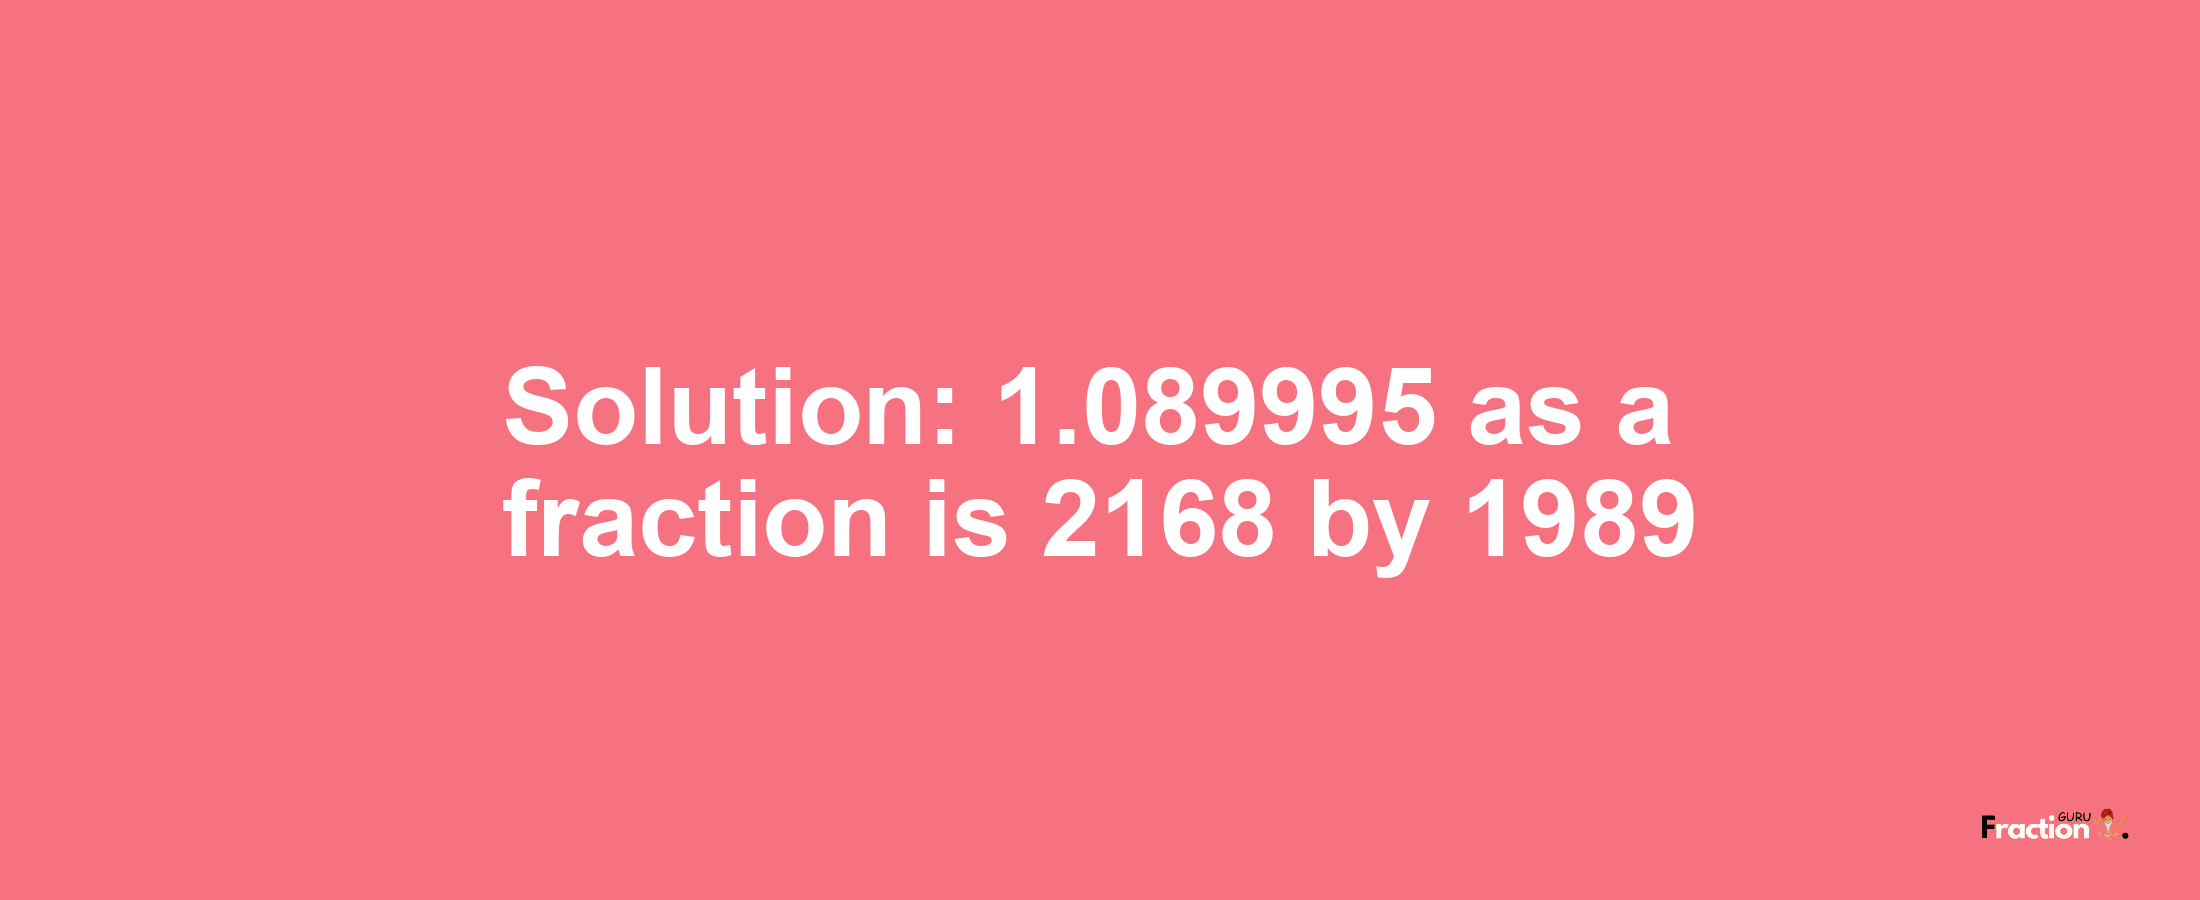 Solution:1.089995 as a fraction is 2168/1989